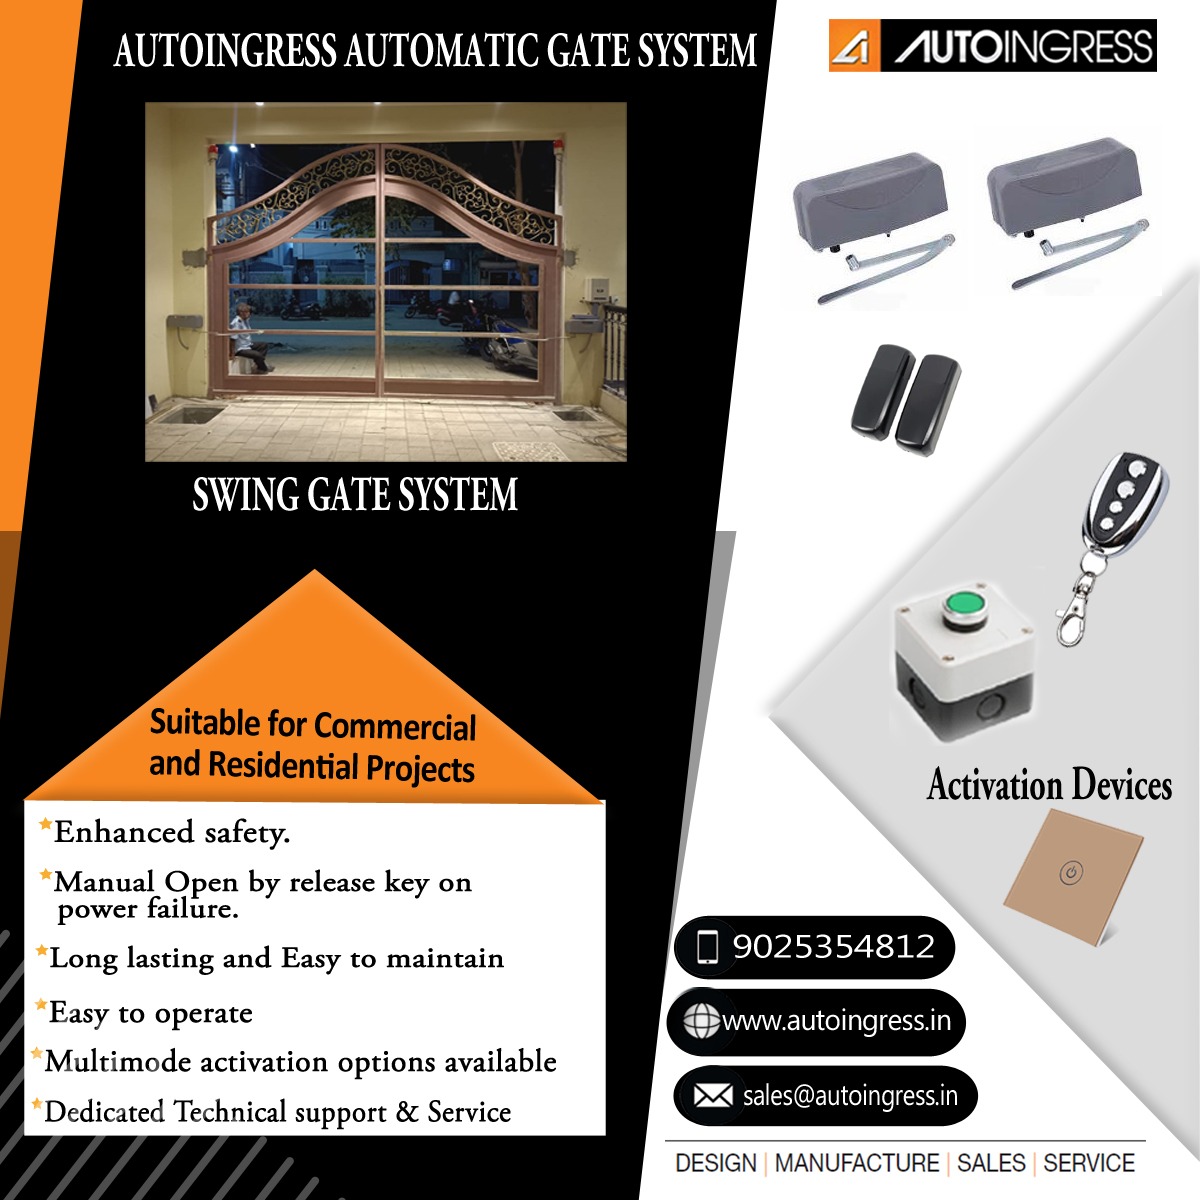 Secure your Building Perimeter with the most trusted Gate Automation Technology from Auto Ingress. Ever wondered how to operate your gate with utmost comfort